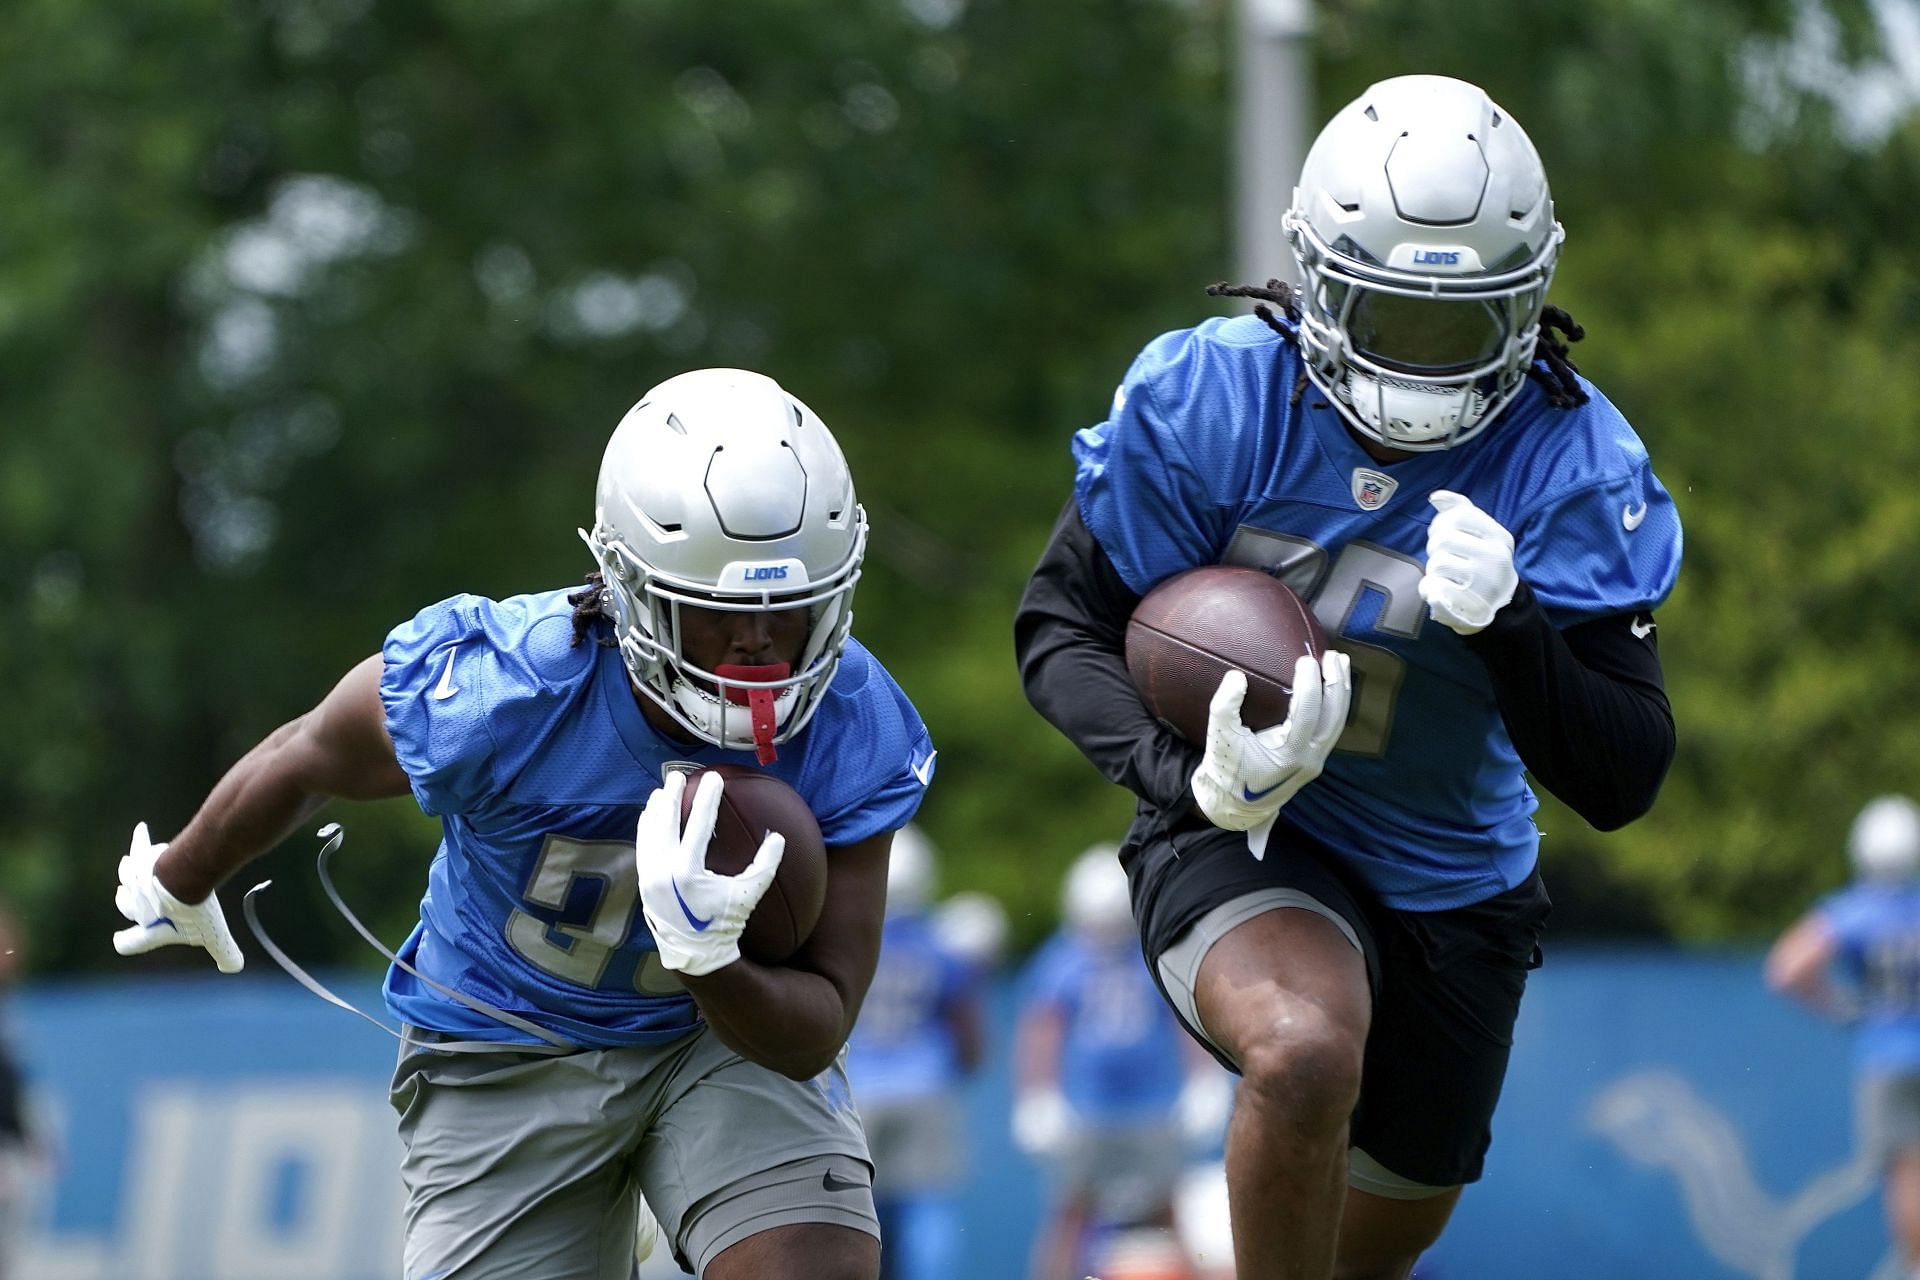 What can we expect from the Lions?